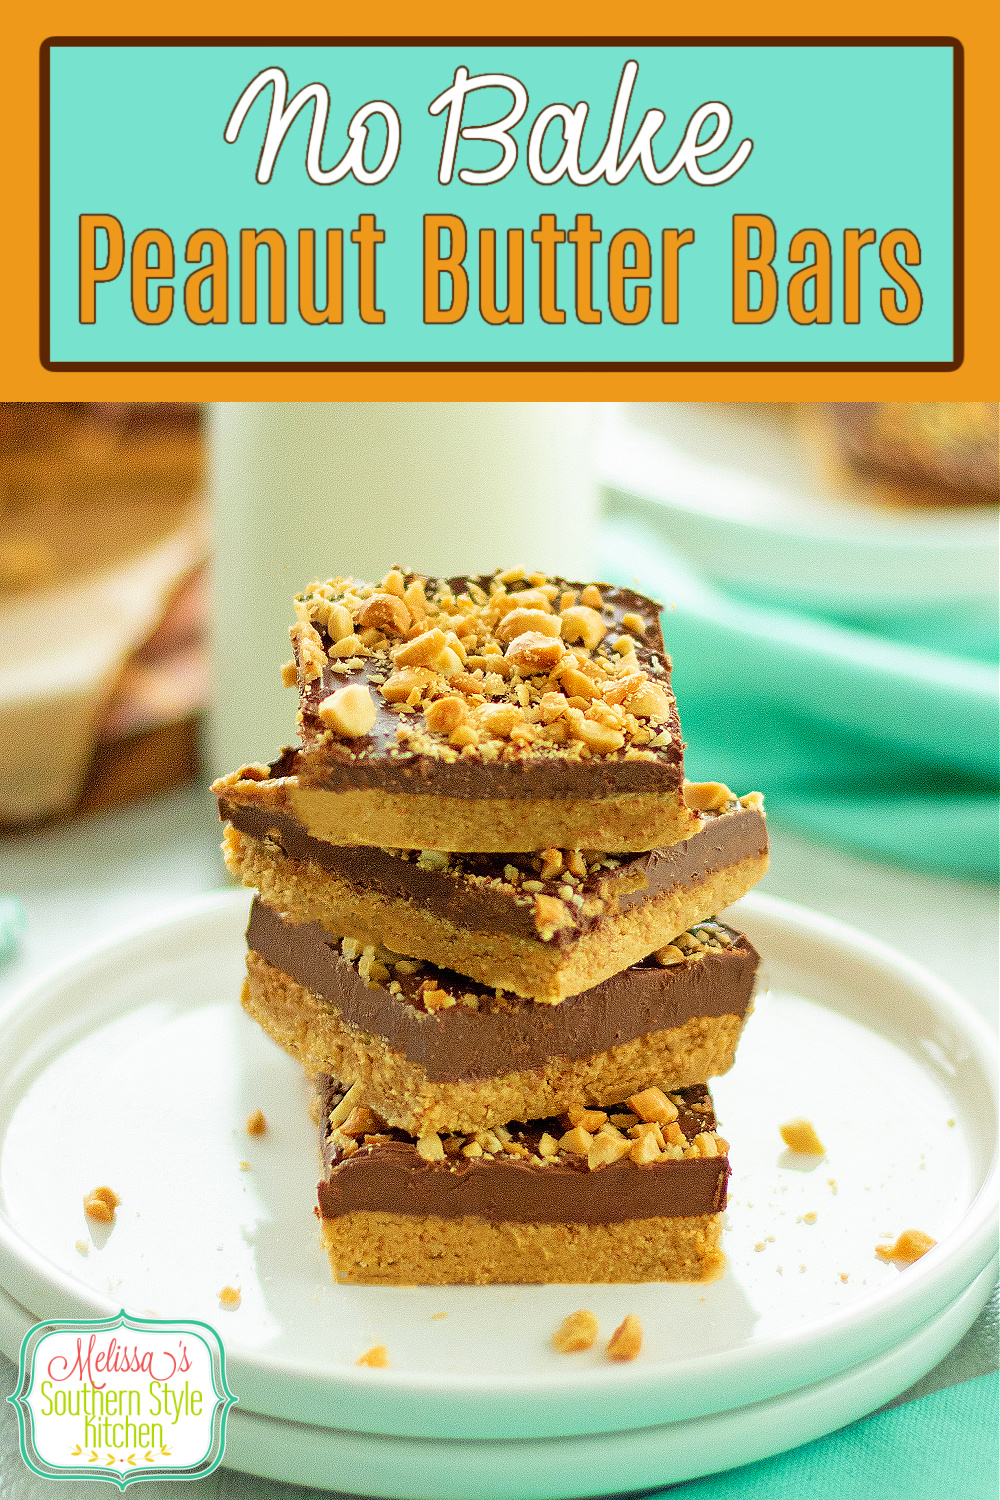 These no bake Peanut Butter Bars are drizzled with a warm chocolate and peanut butter infused topping and sprinkled with chopped peanuts. #peanutbutter #cookiebars #nobakebars #peanutbutterbars #easypeanutbutterbars #holidayrecipes #christmascookierecipes